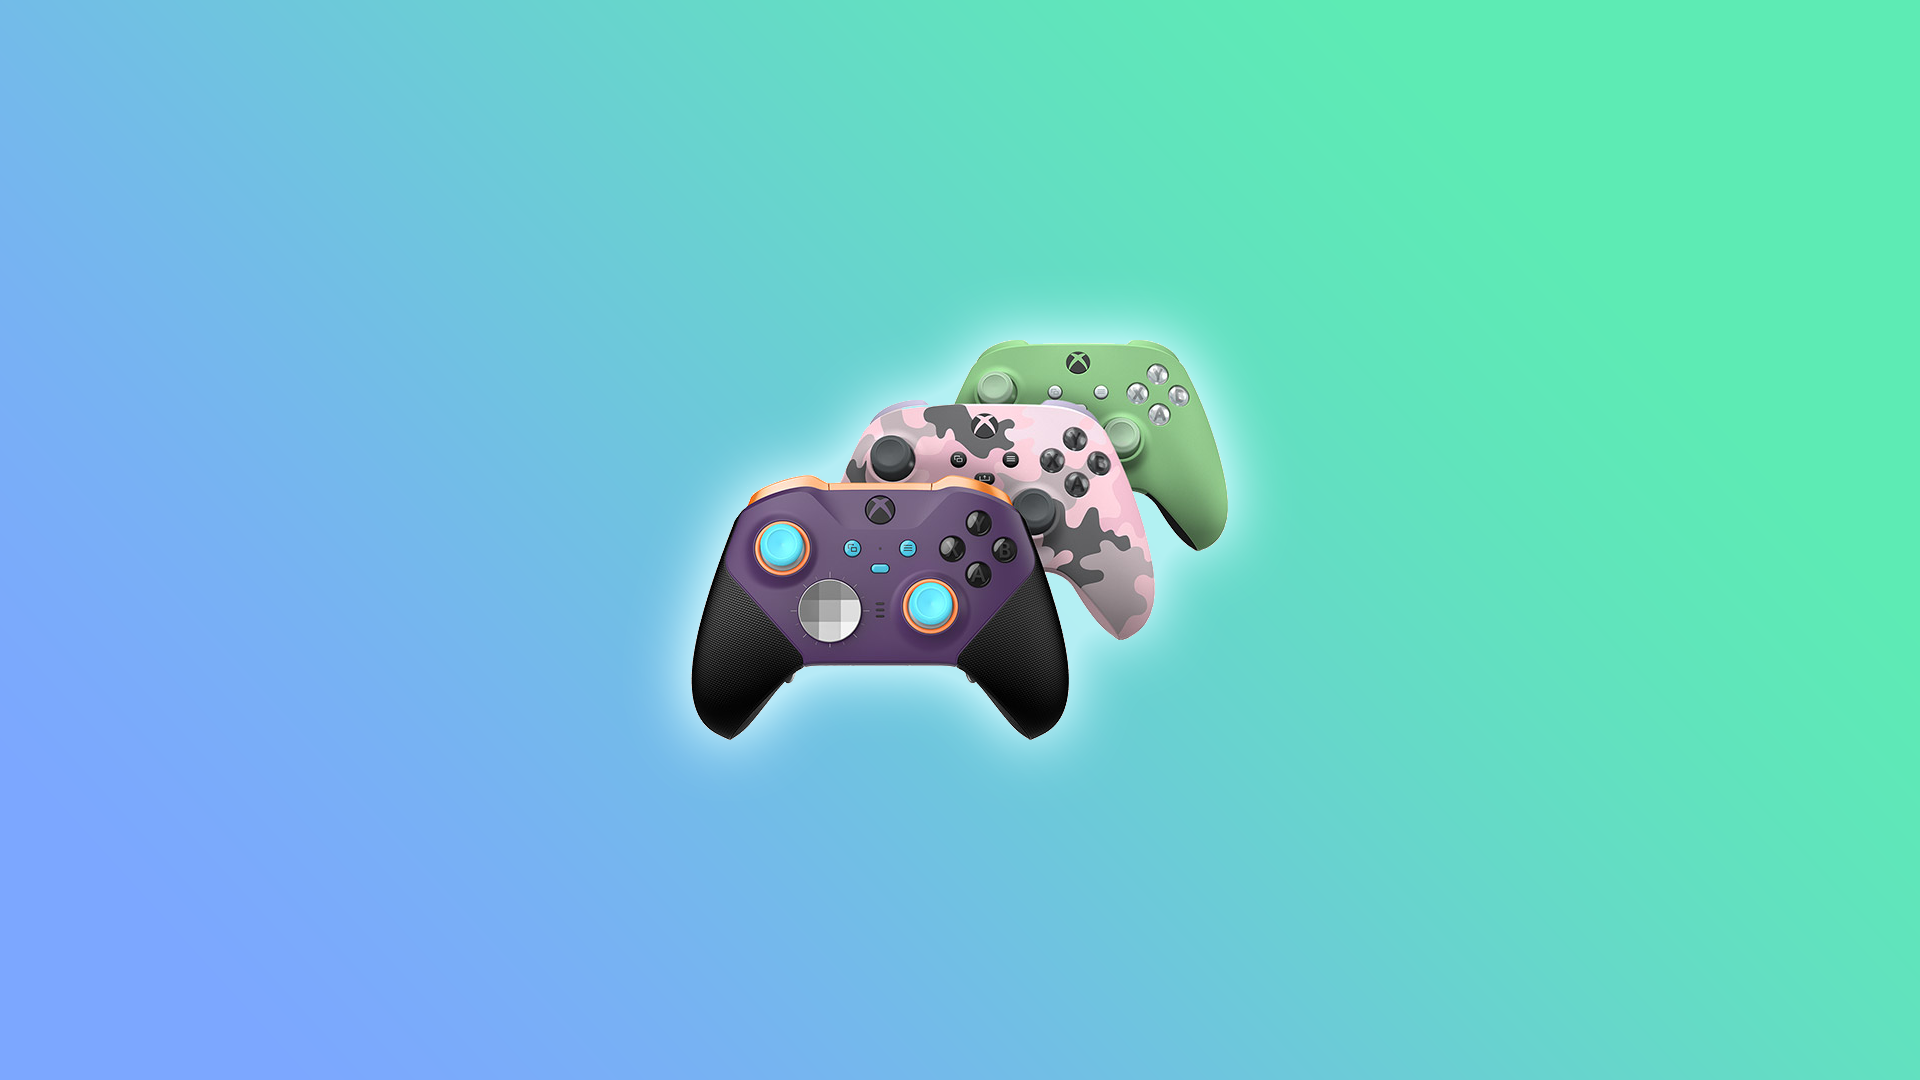 Microsoft is rumored to be testing a prototype of a new Xbox controller with tactile effects and a touchpad